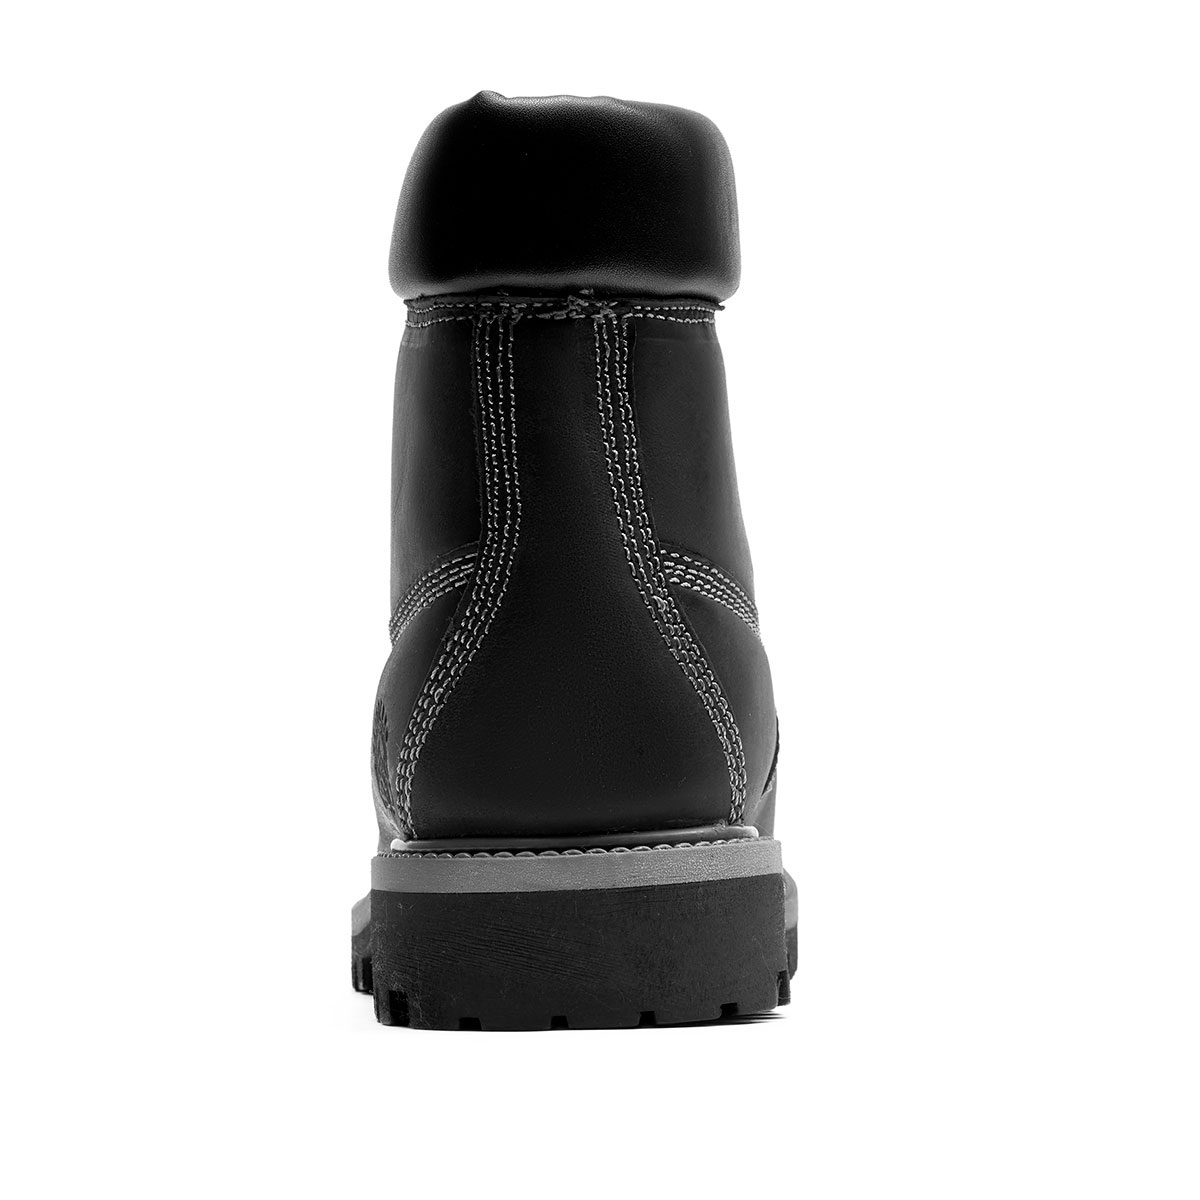 Grinders Brixton Leather Boots  11114509